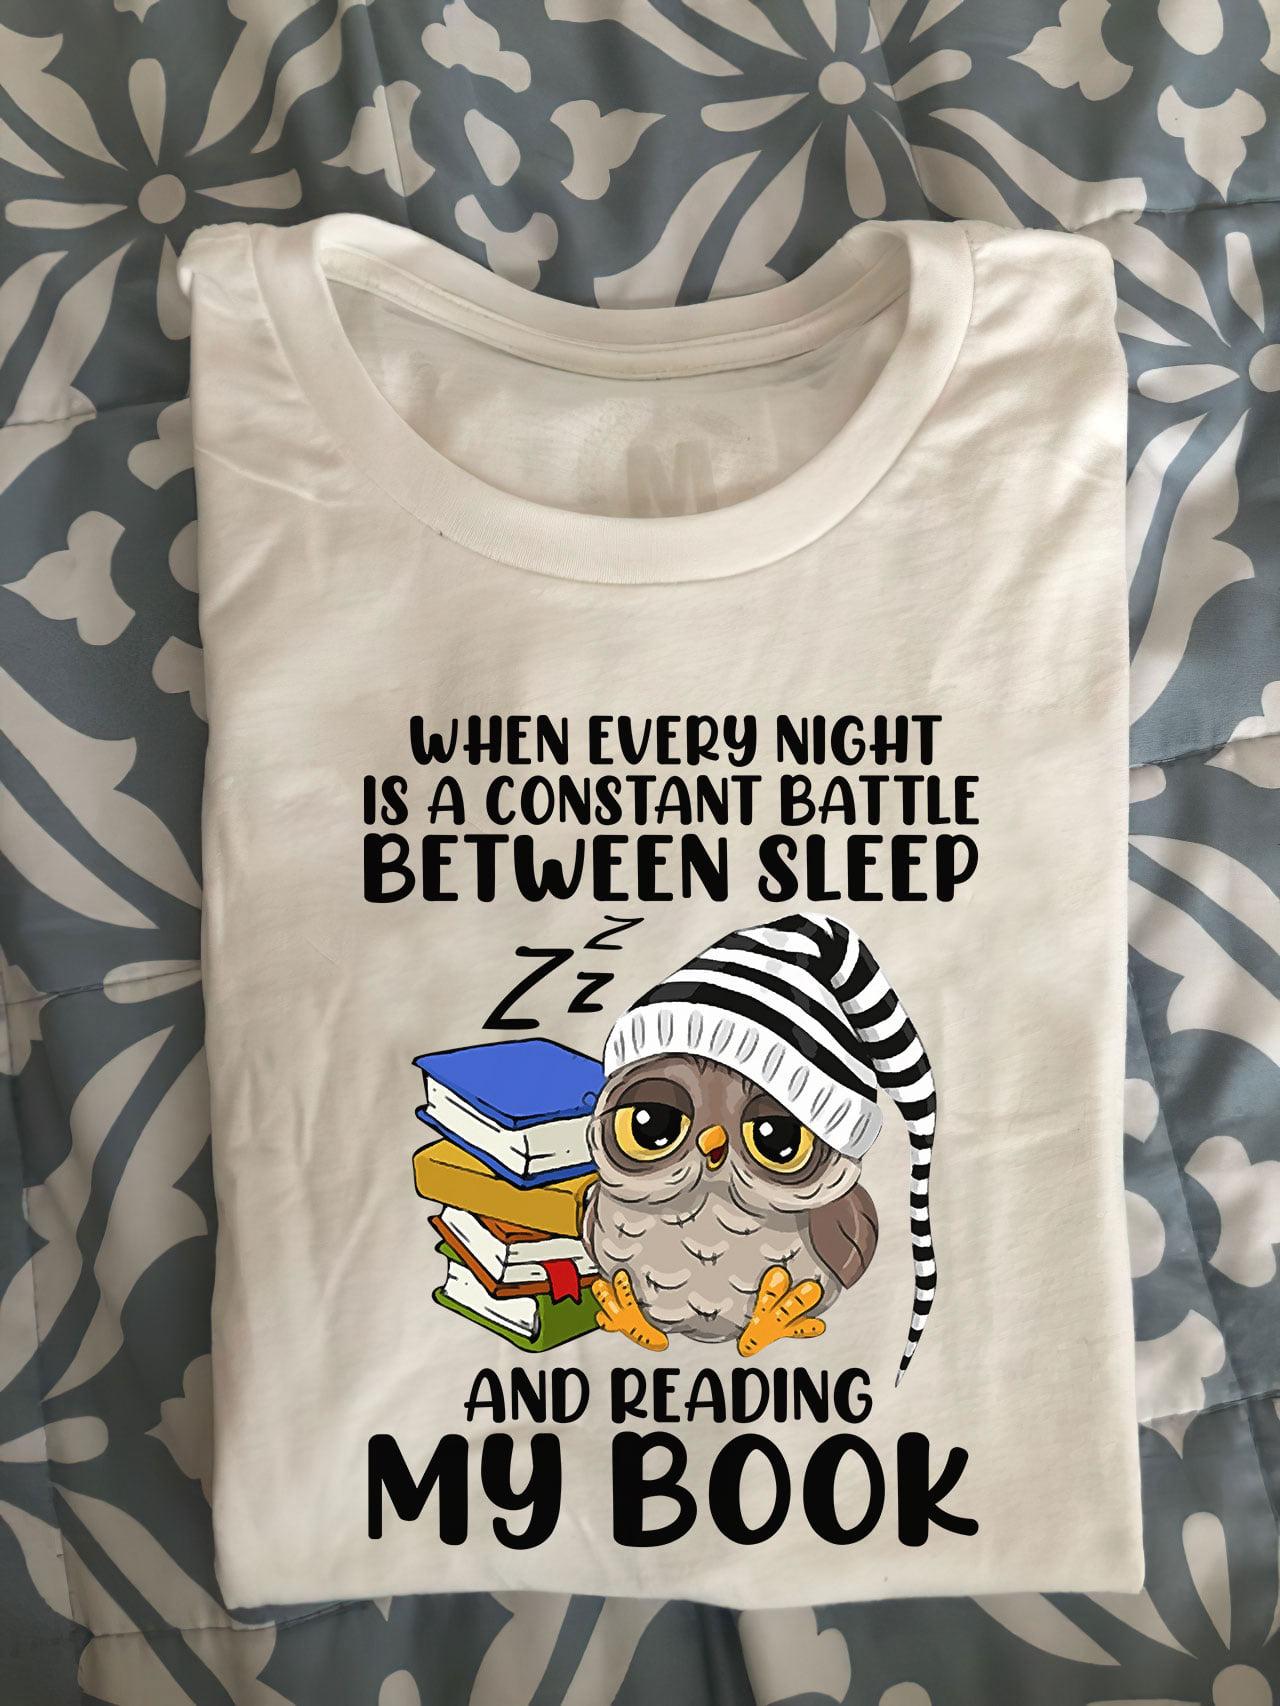 When every night is a constant battle between sleep and reading my book - Bookaholic gift, owl and books